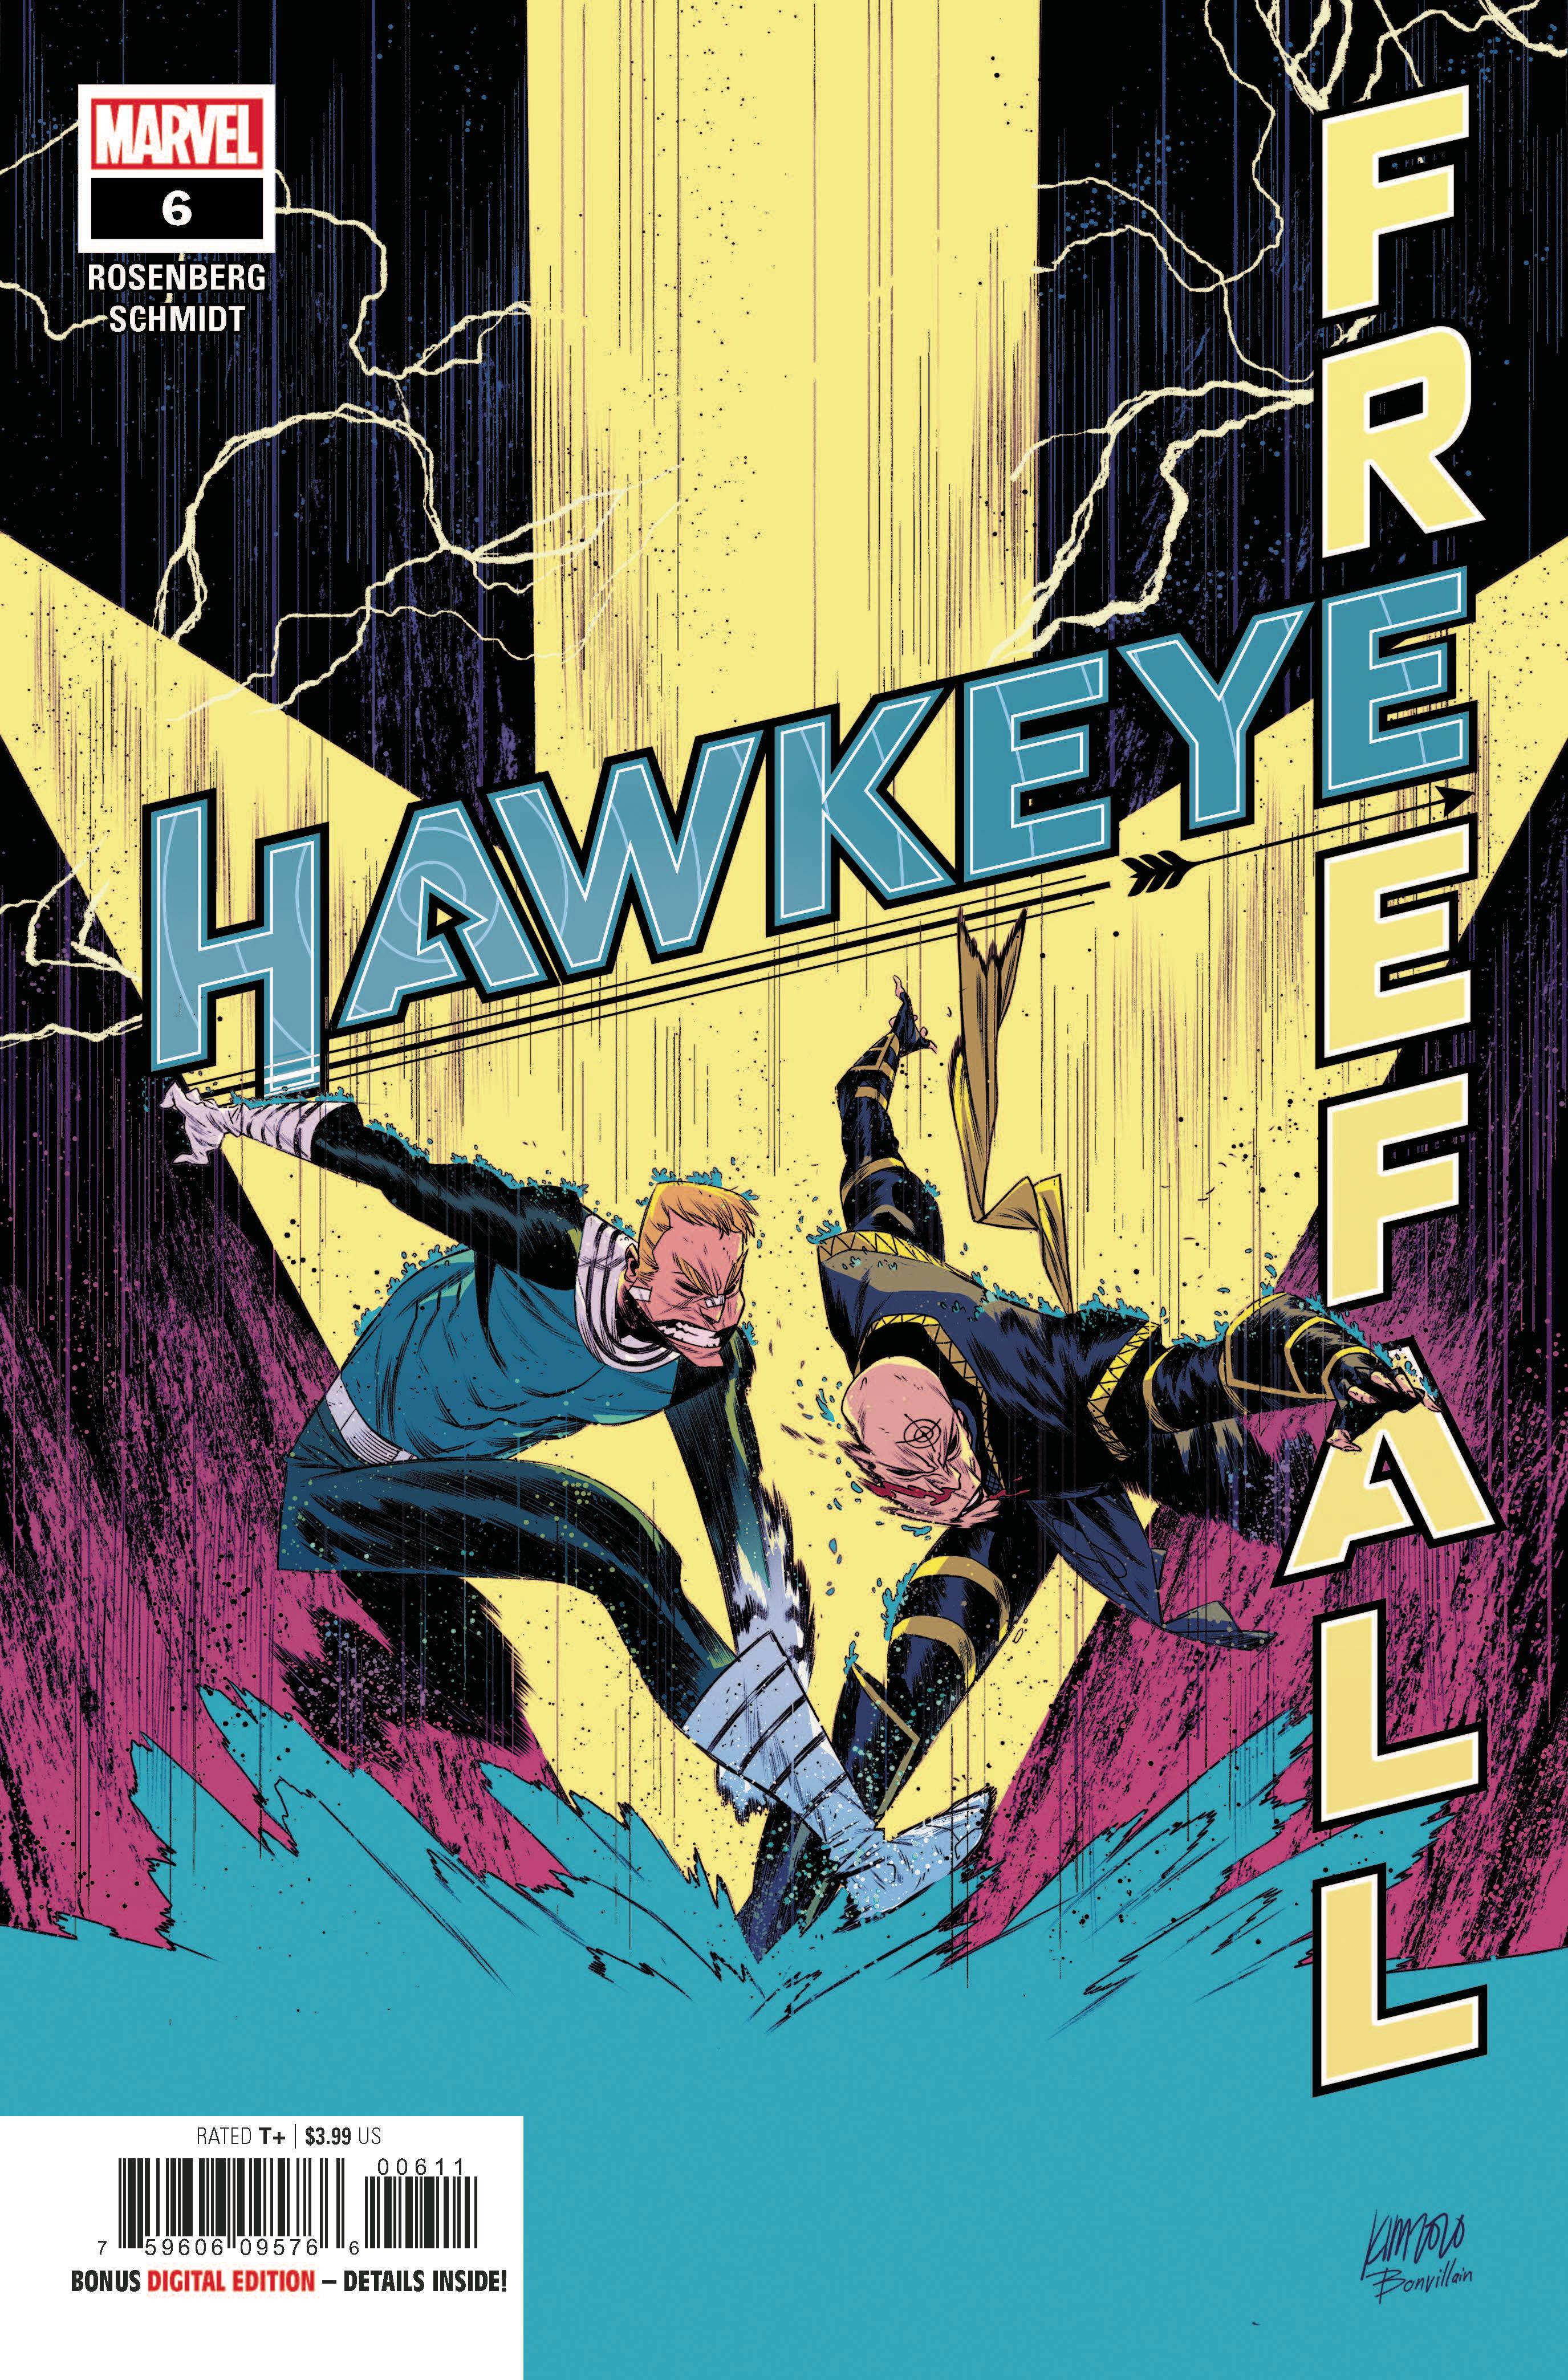 HAWKEYE FREE FALL #6 | Game Master's Emporium (The New GME)